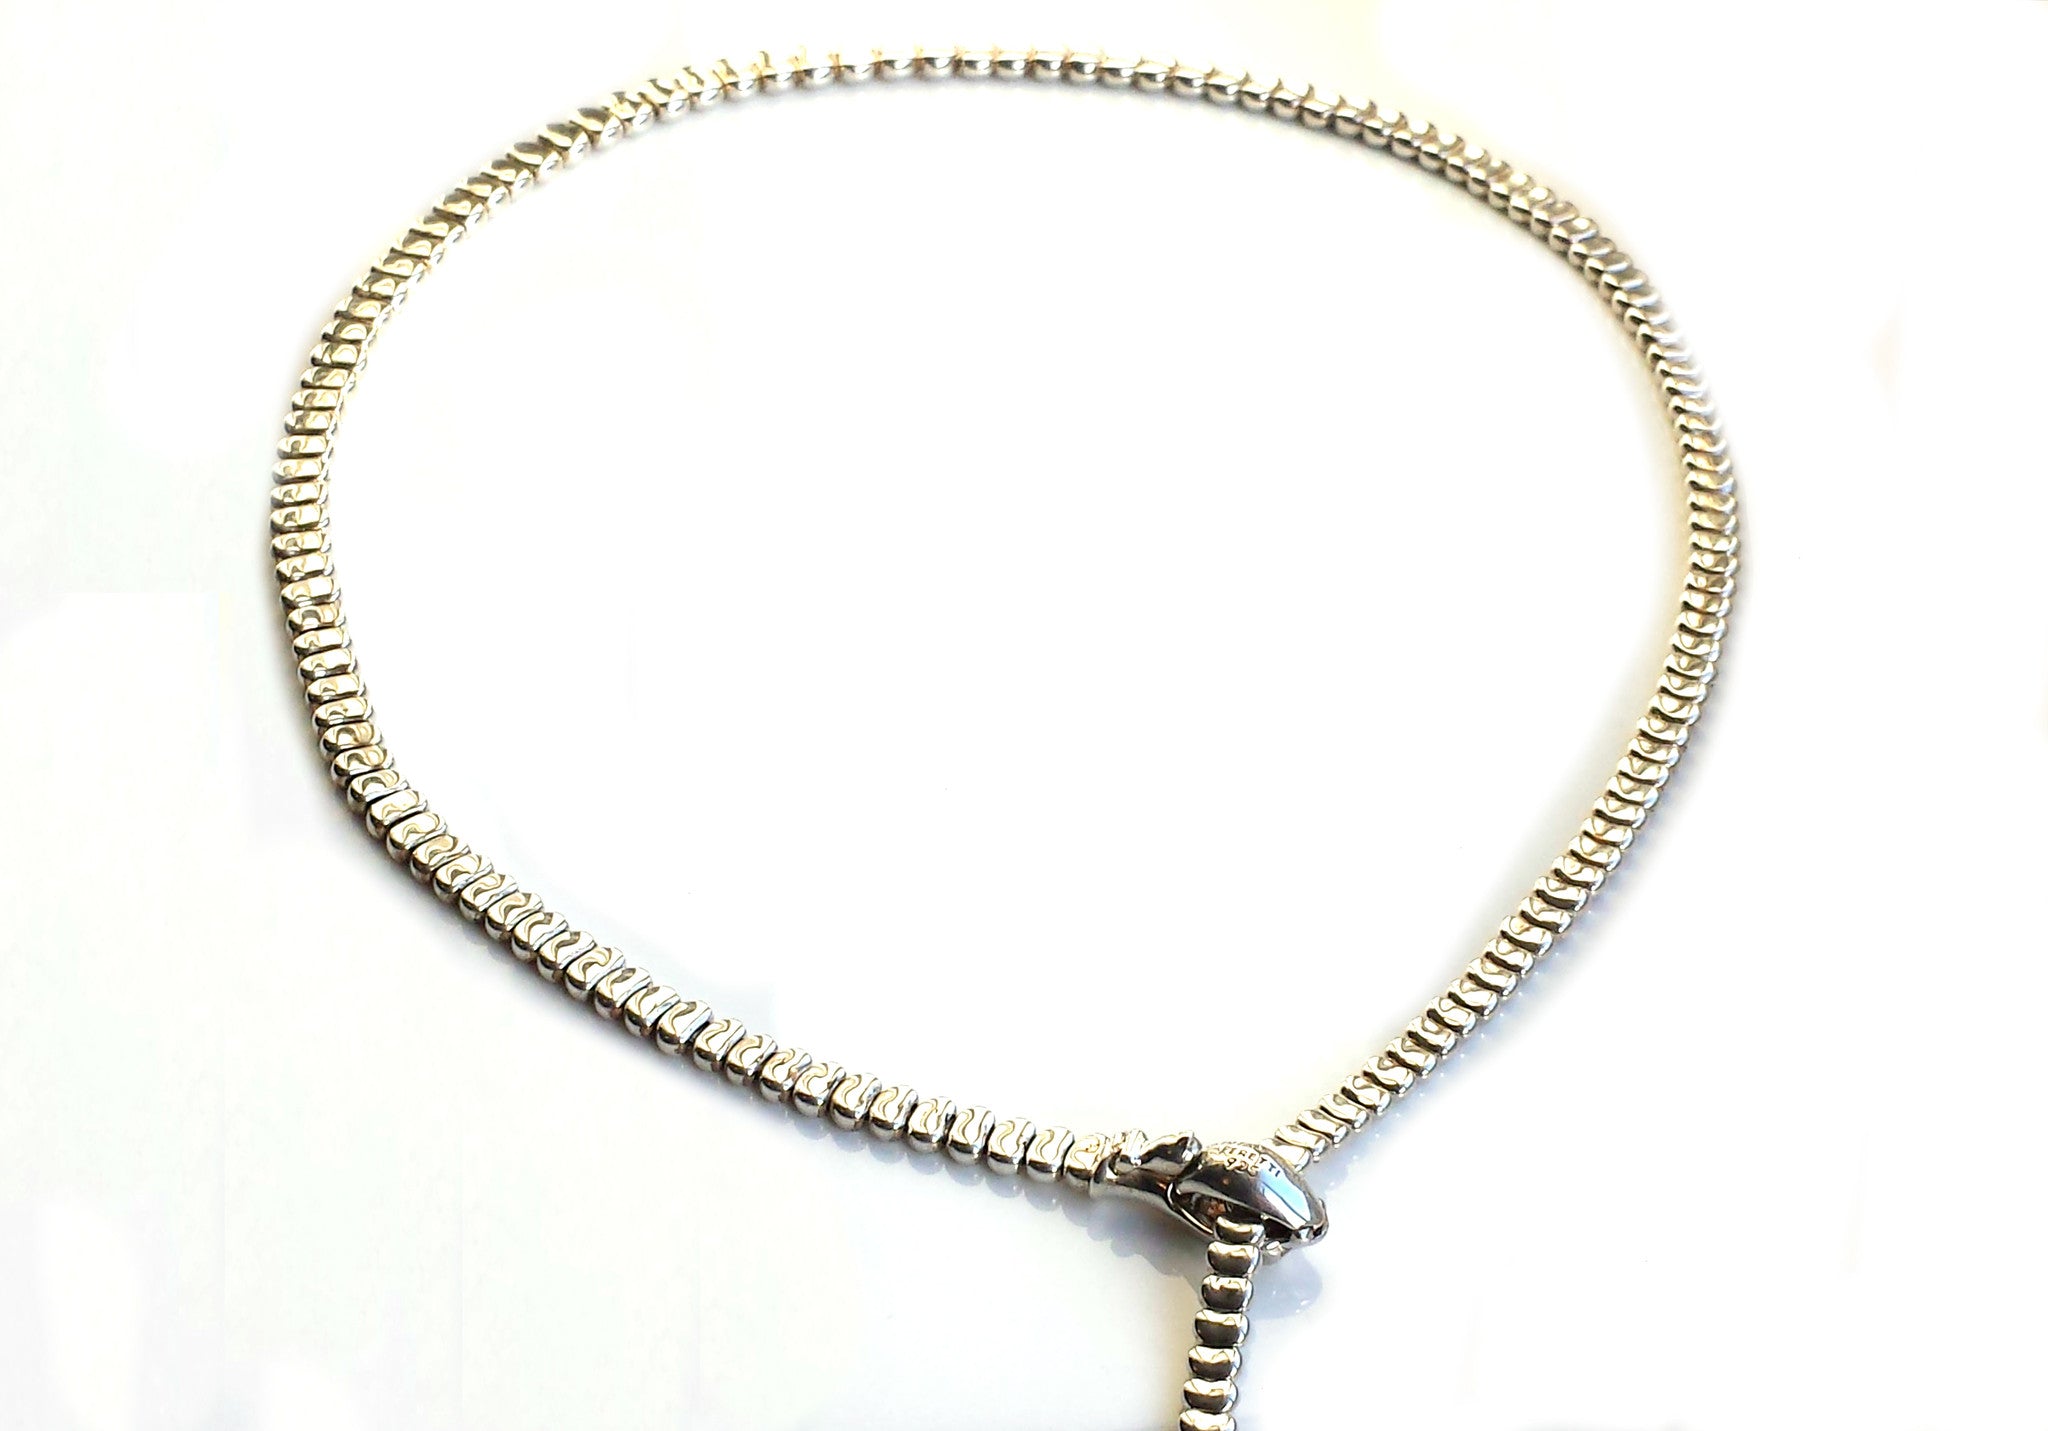 Tiffany & Co. Sterling Silver 28 inch Serpent / Snake Necklace by Pere ...